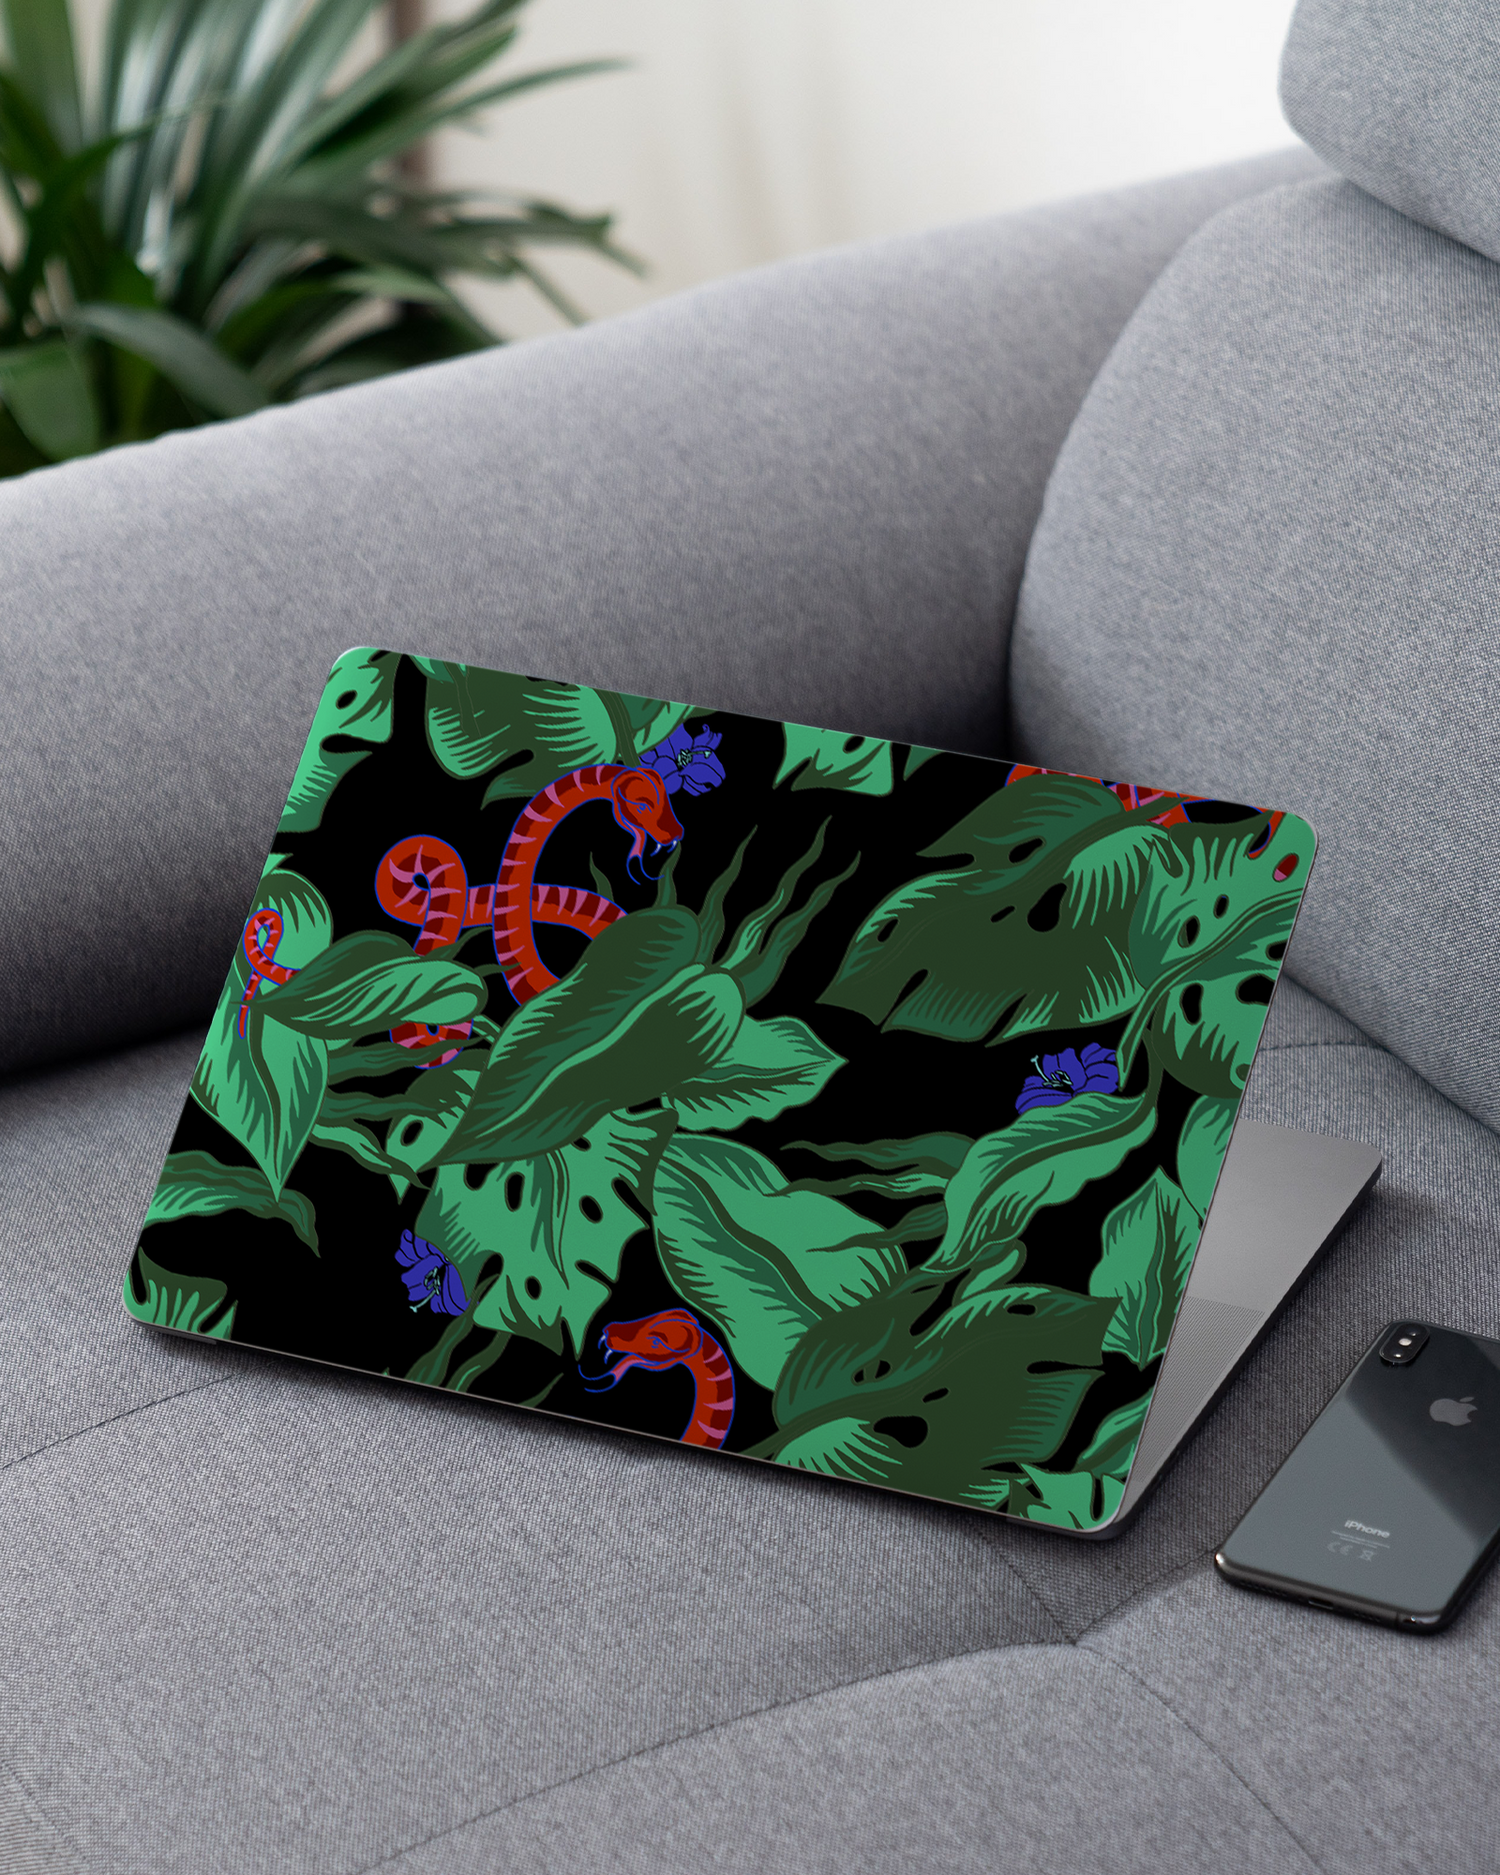 Tropical Snakes Laptop Skin for 13 inch Apple MacBooks on a couch